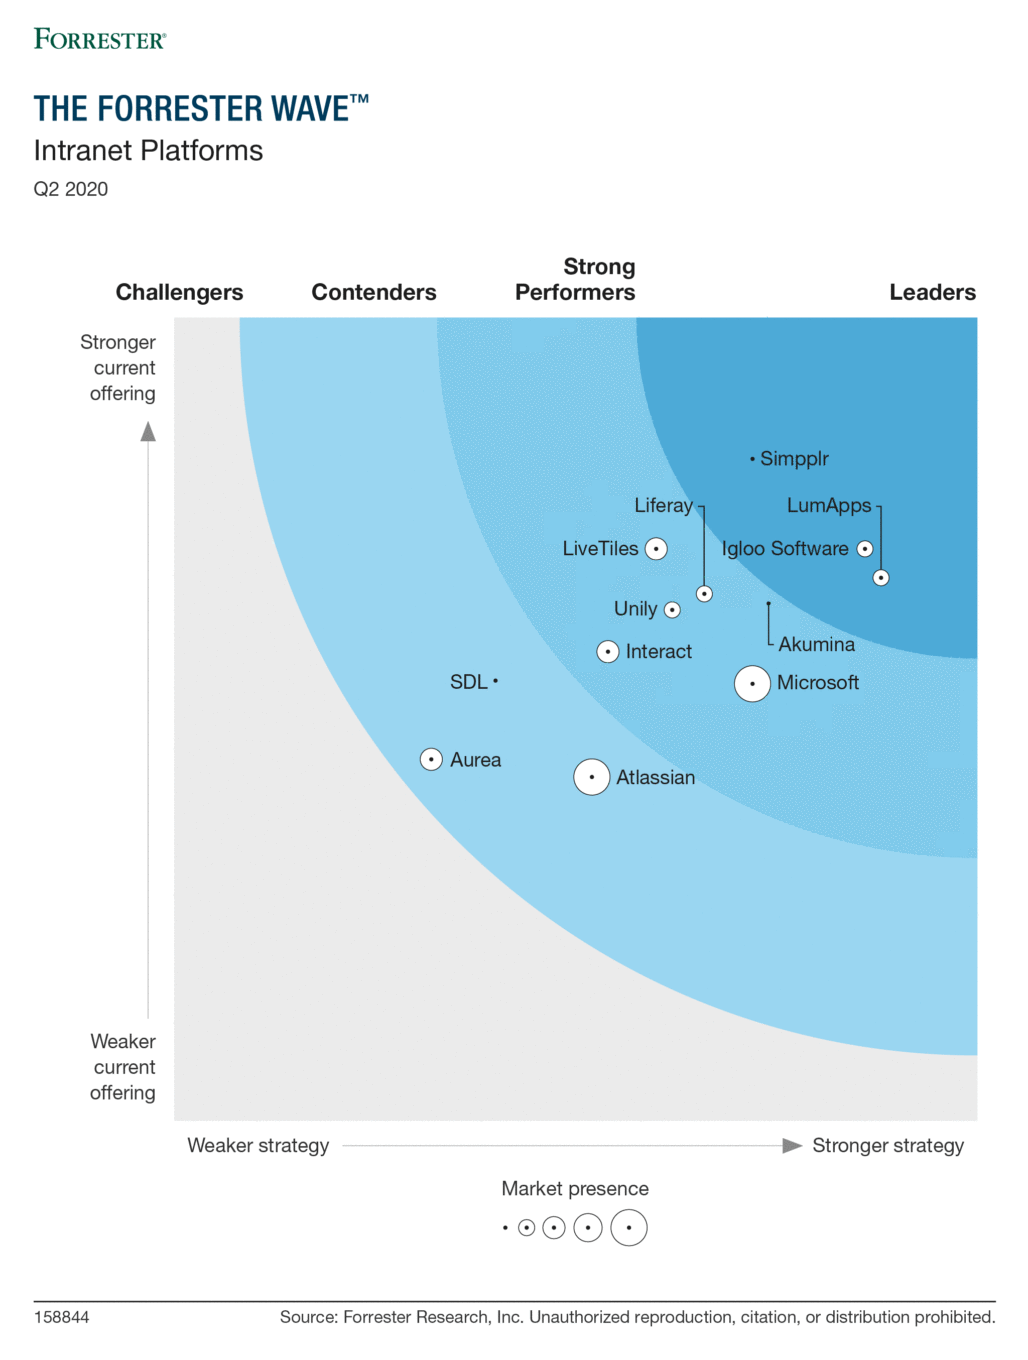 Chart from The Forrester Wave showing the market presence and general ranking of intranet providers